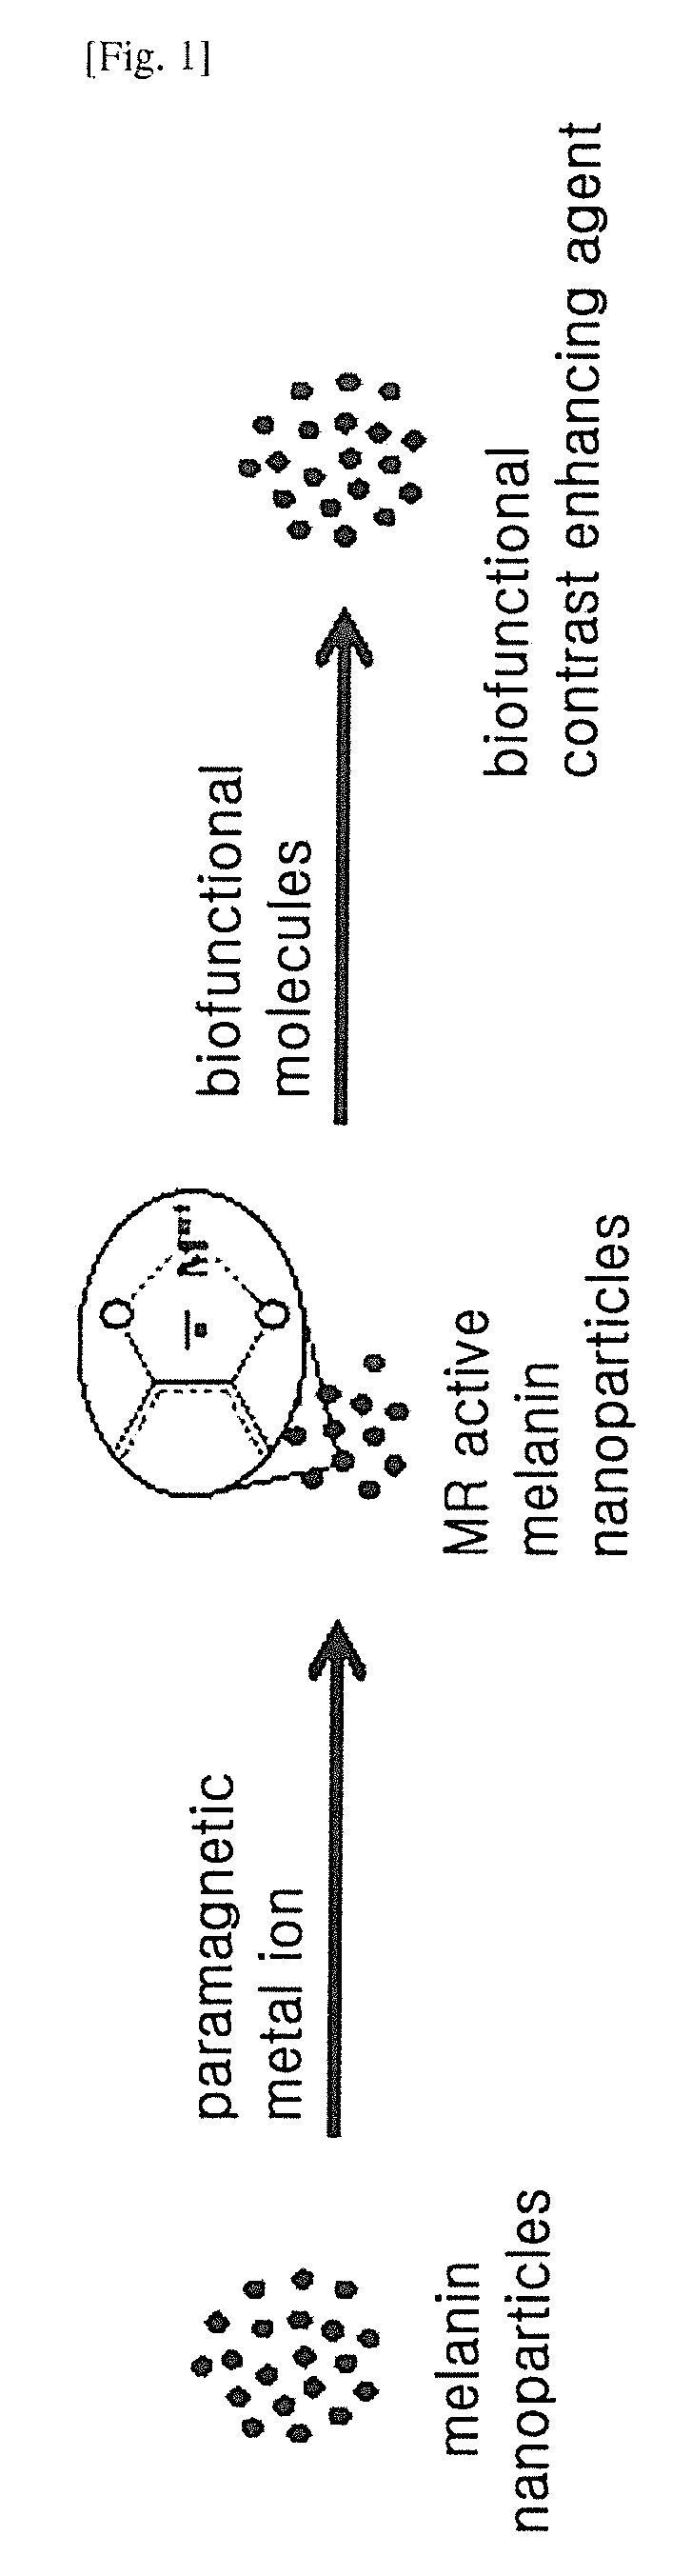 Contrast agent for nuclear magnetic resonance imaging comprising melanin nanoparticles stably dispersed in water